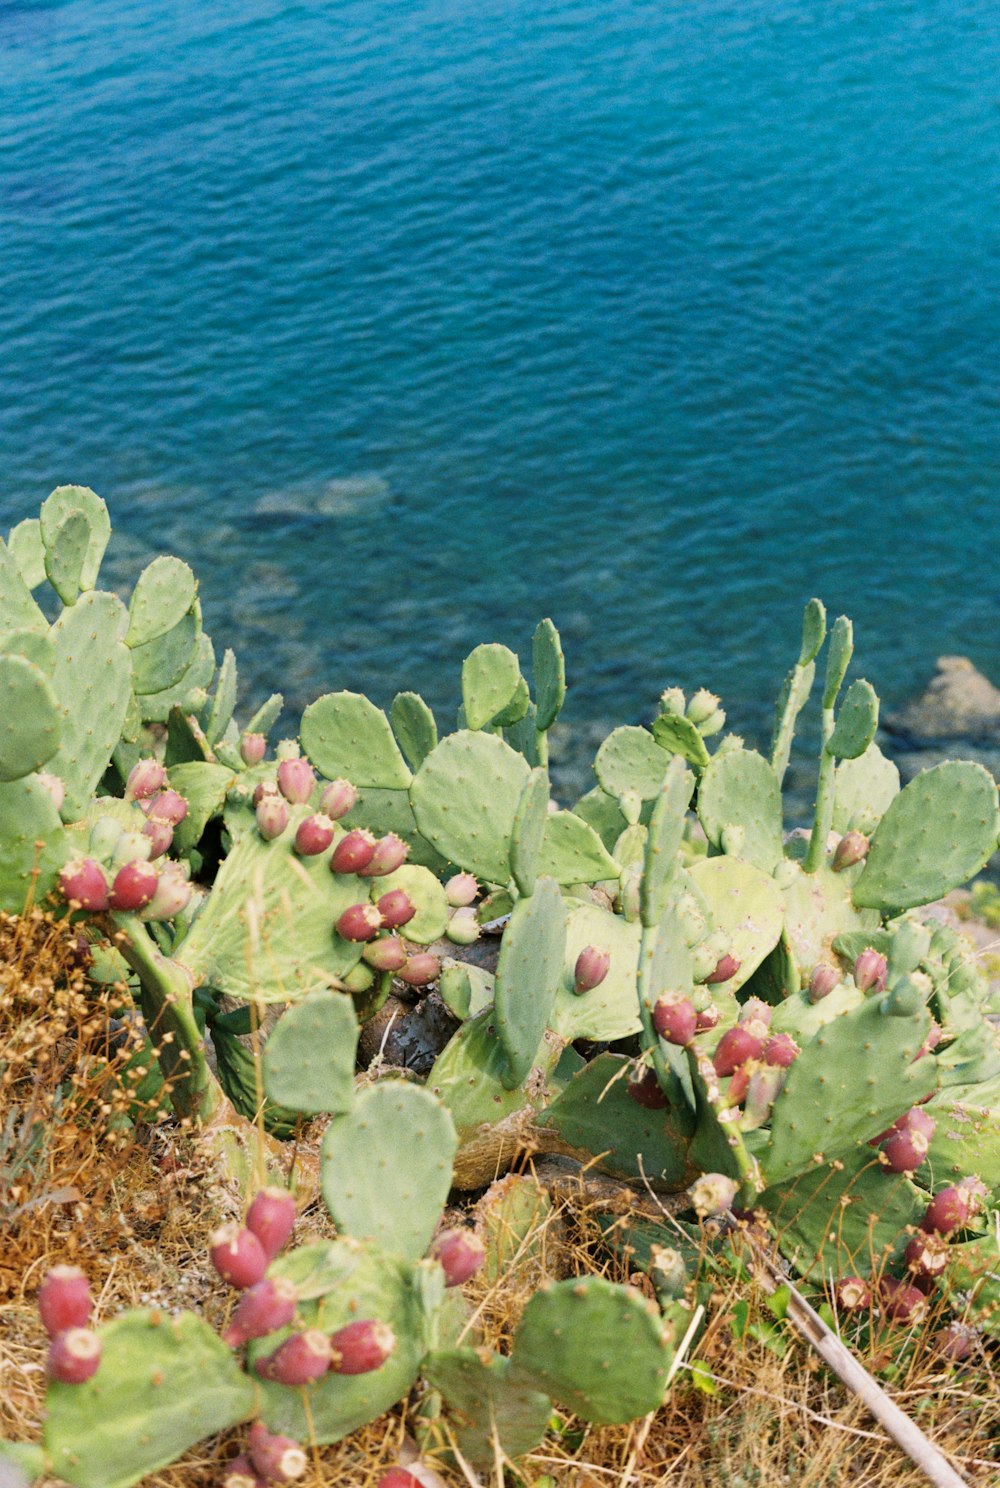 a plant with berries and leaves by water